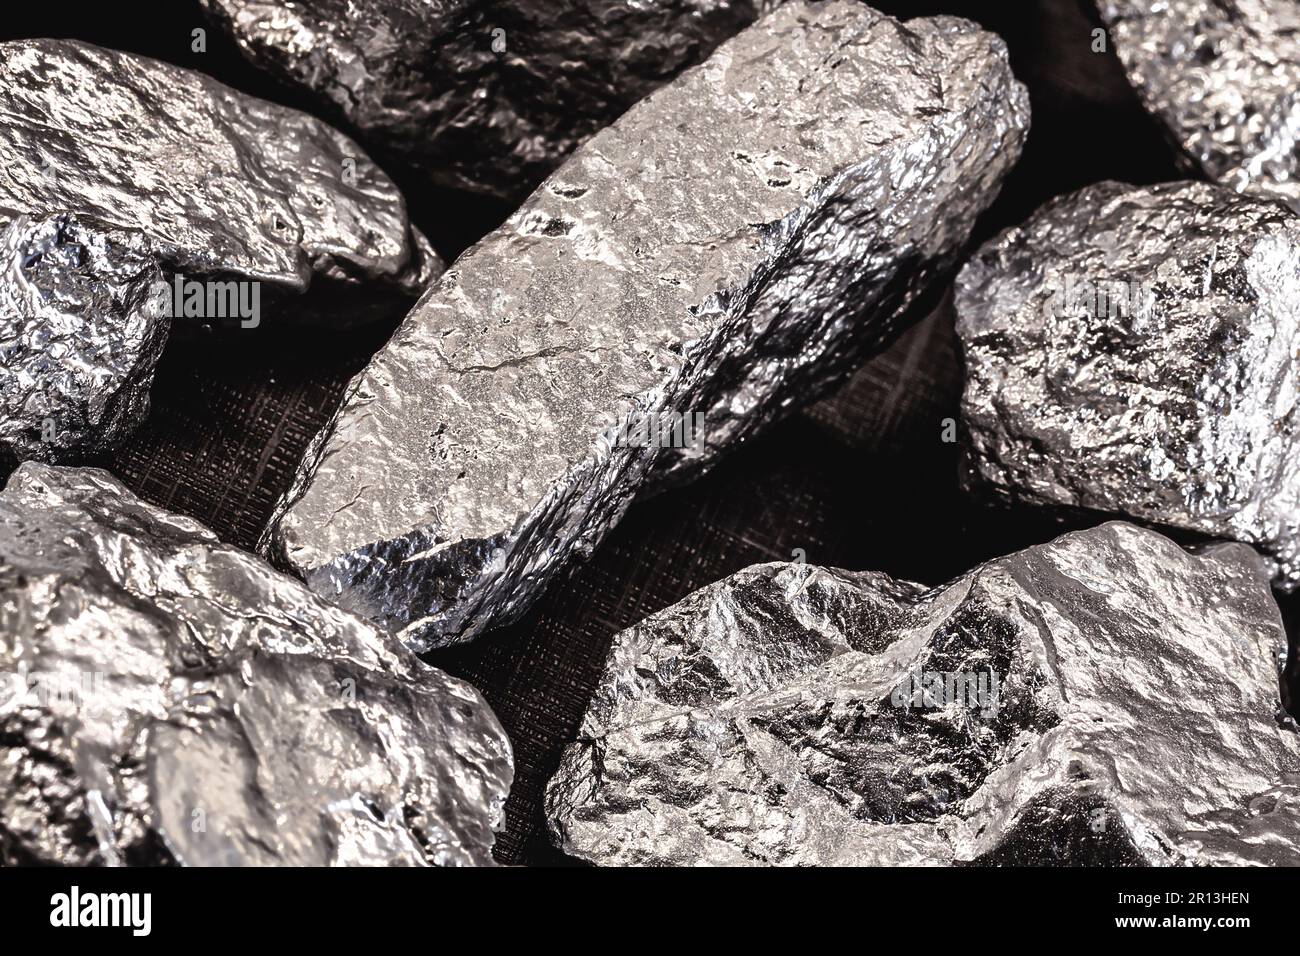 palladium stone, a transition metal used in the production of aerospace ...